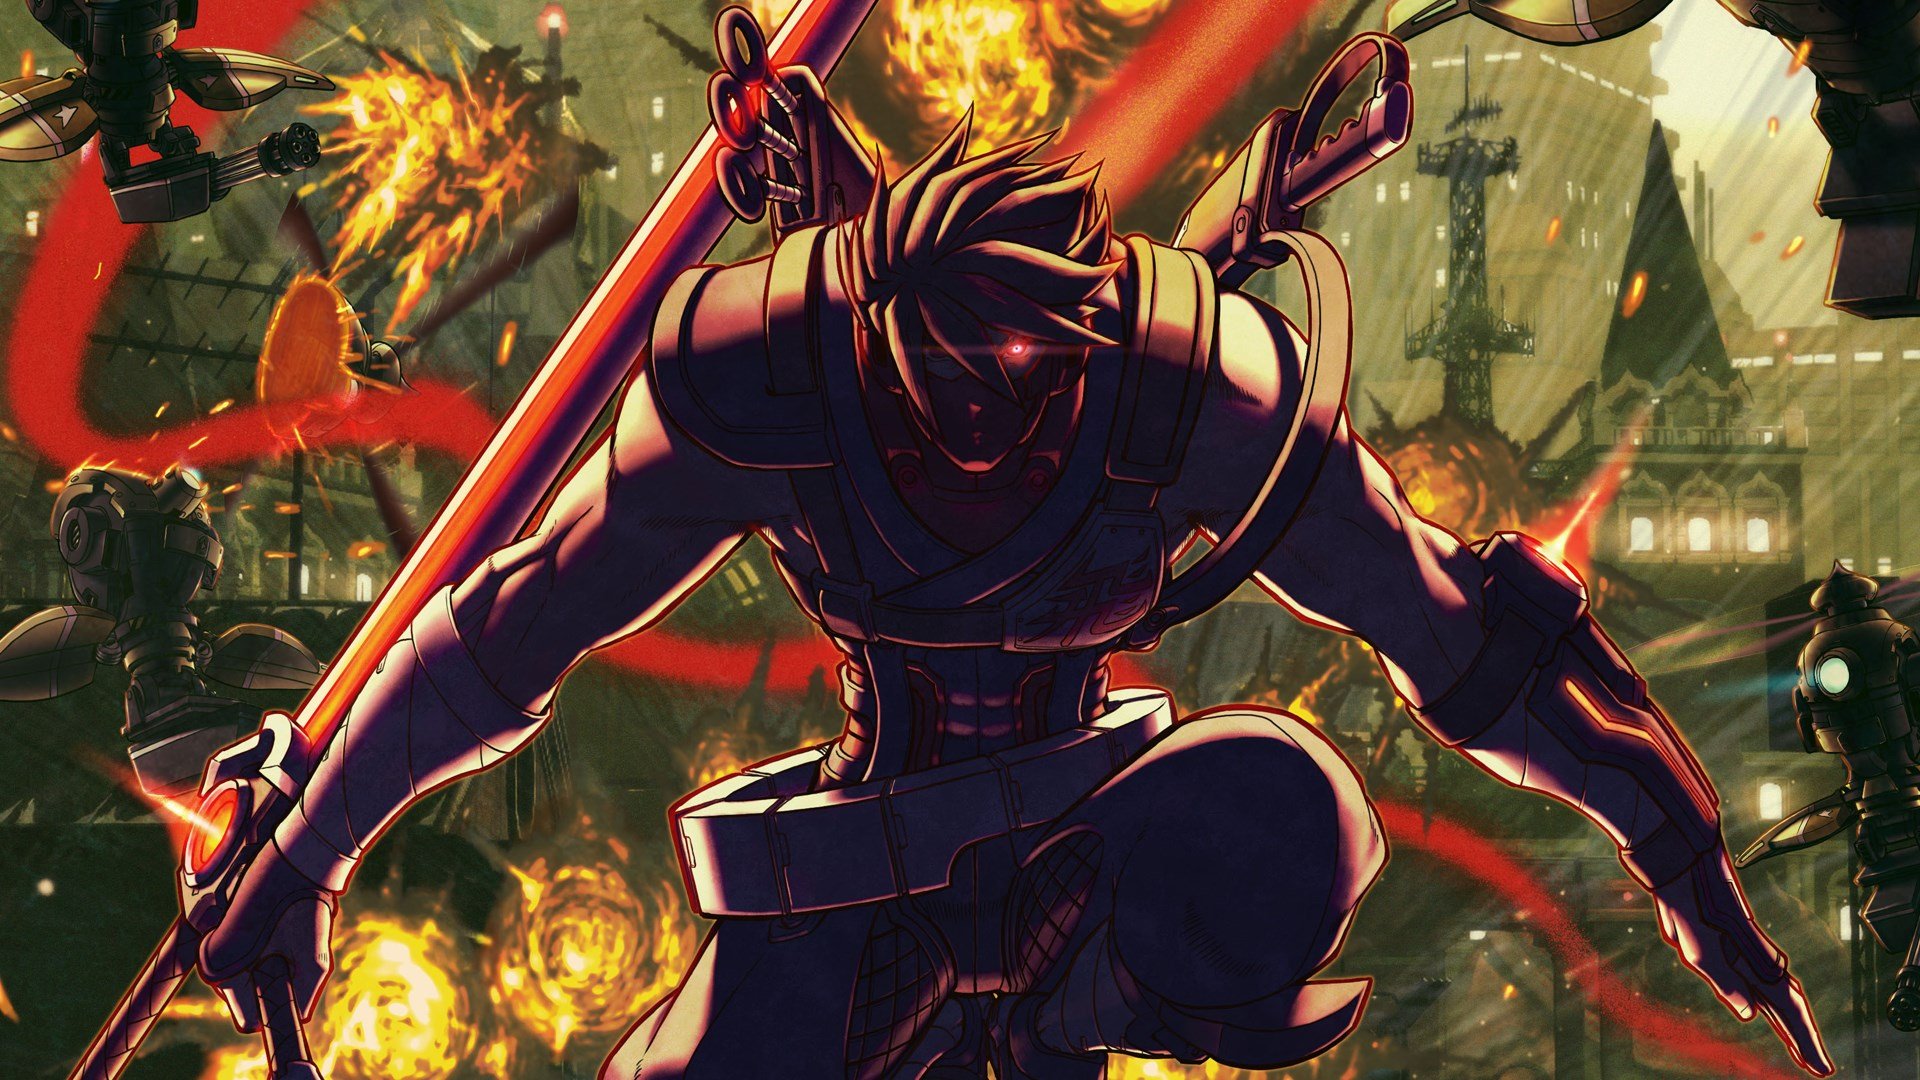 Strider cover image